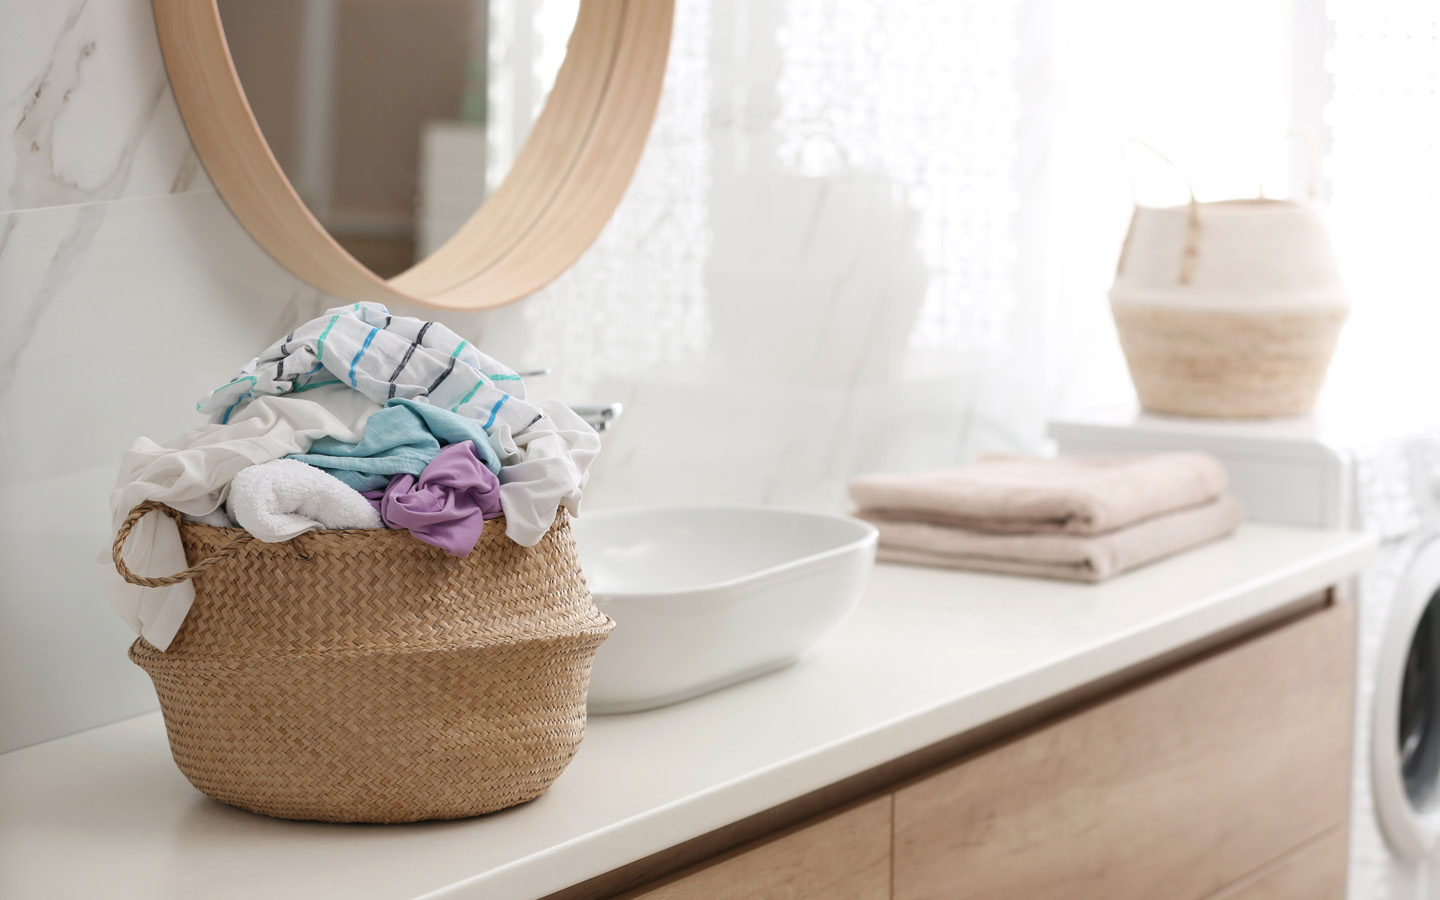 wicker basket over the sink to increase bathroom storage space